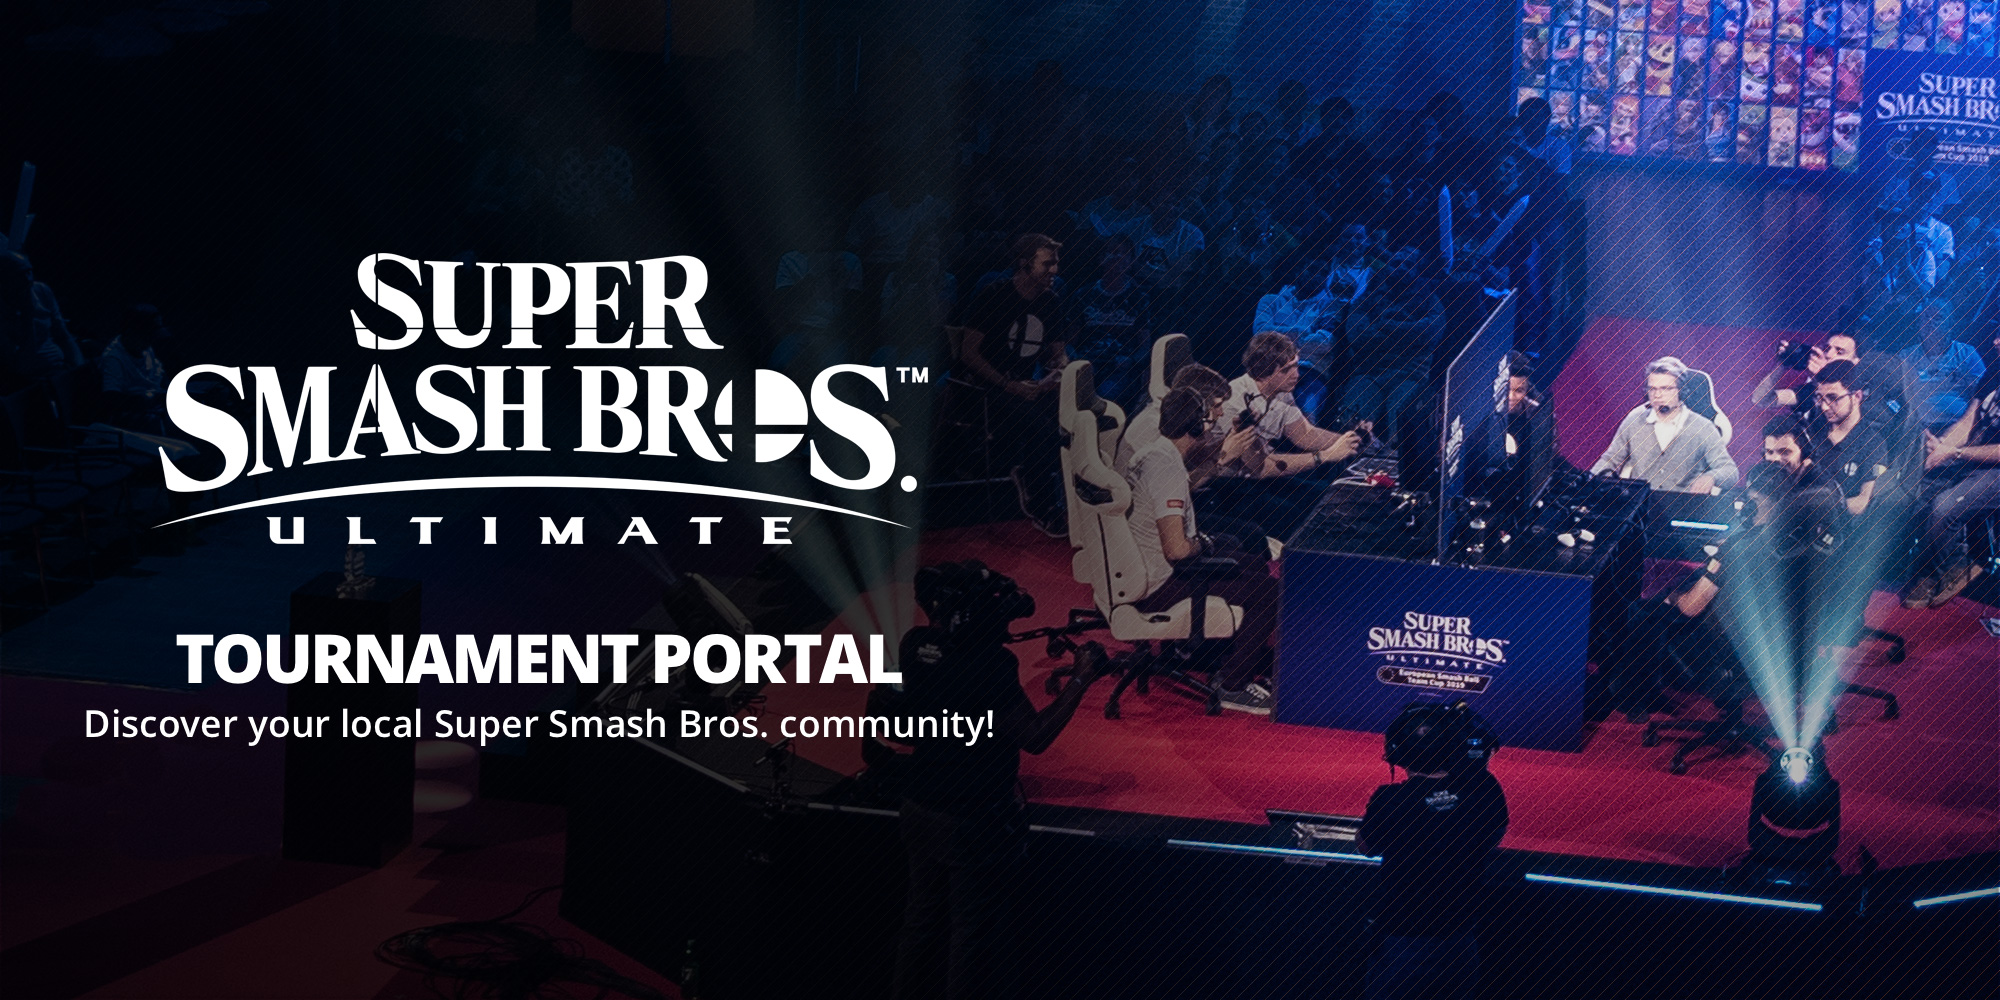 Find your local Smash Bros. community with the Super Smash Bros. Ultimate Tournament Portal!